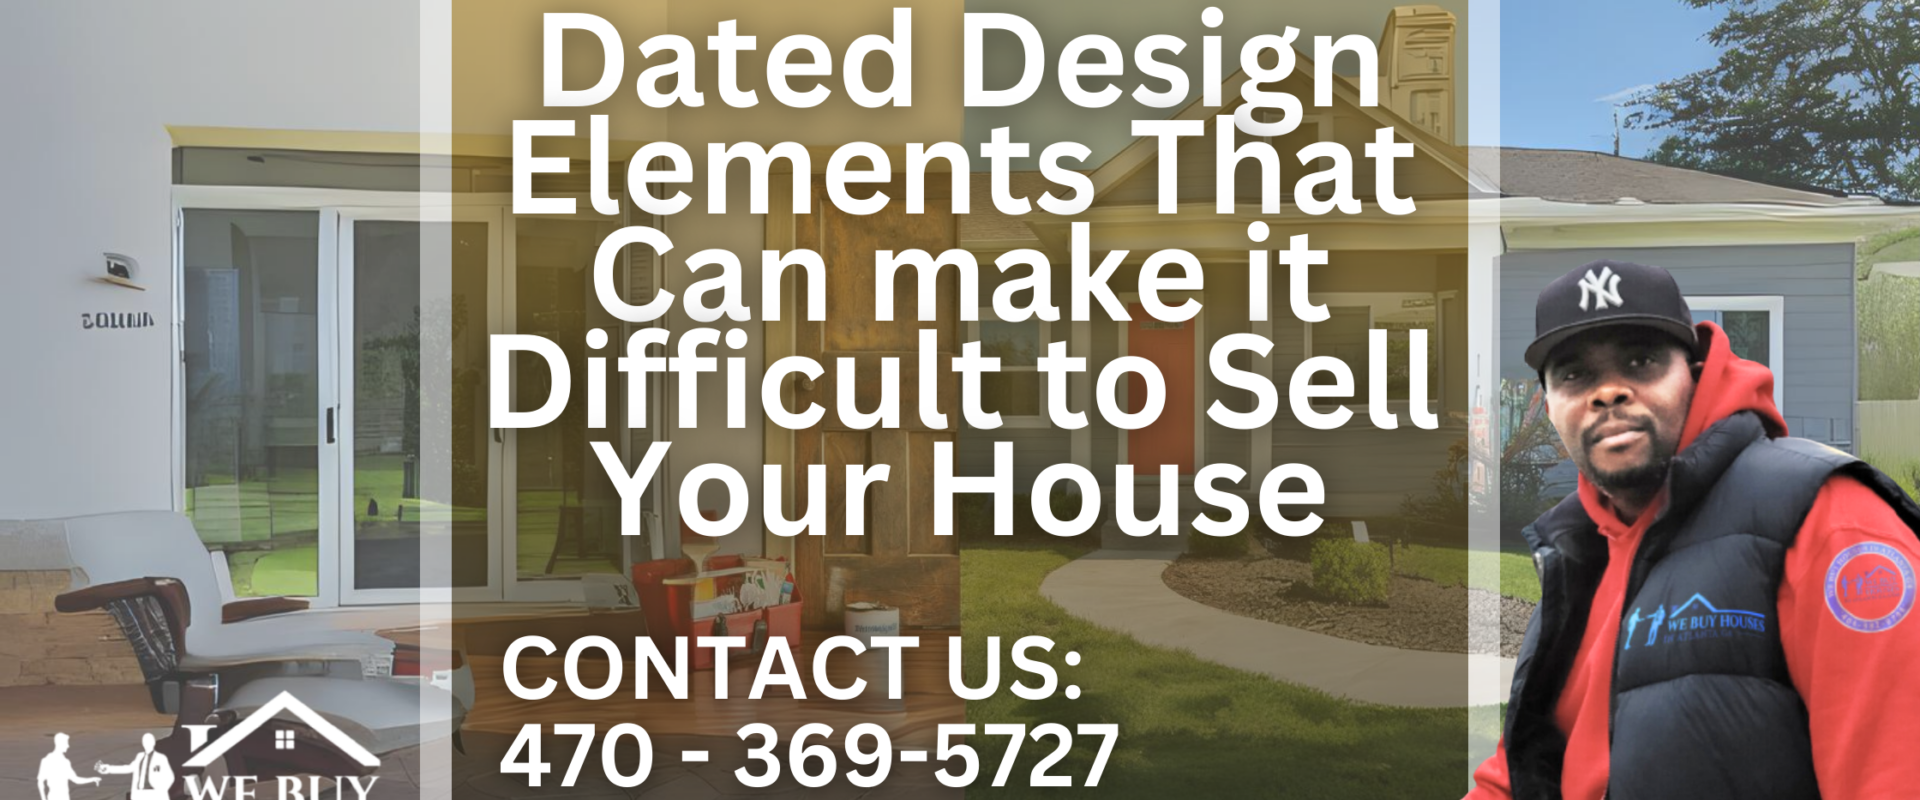 Dated Design Elements That Can make it Difficult to Sell Your House